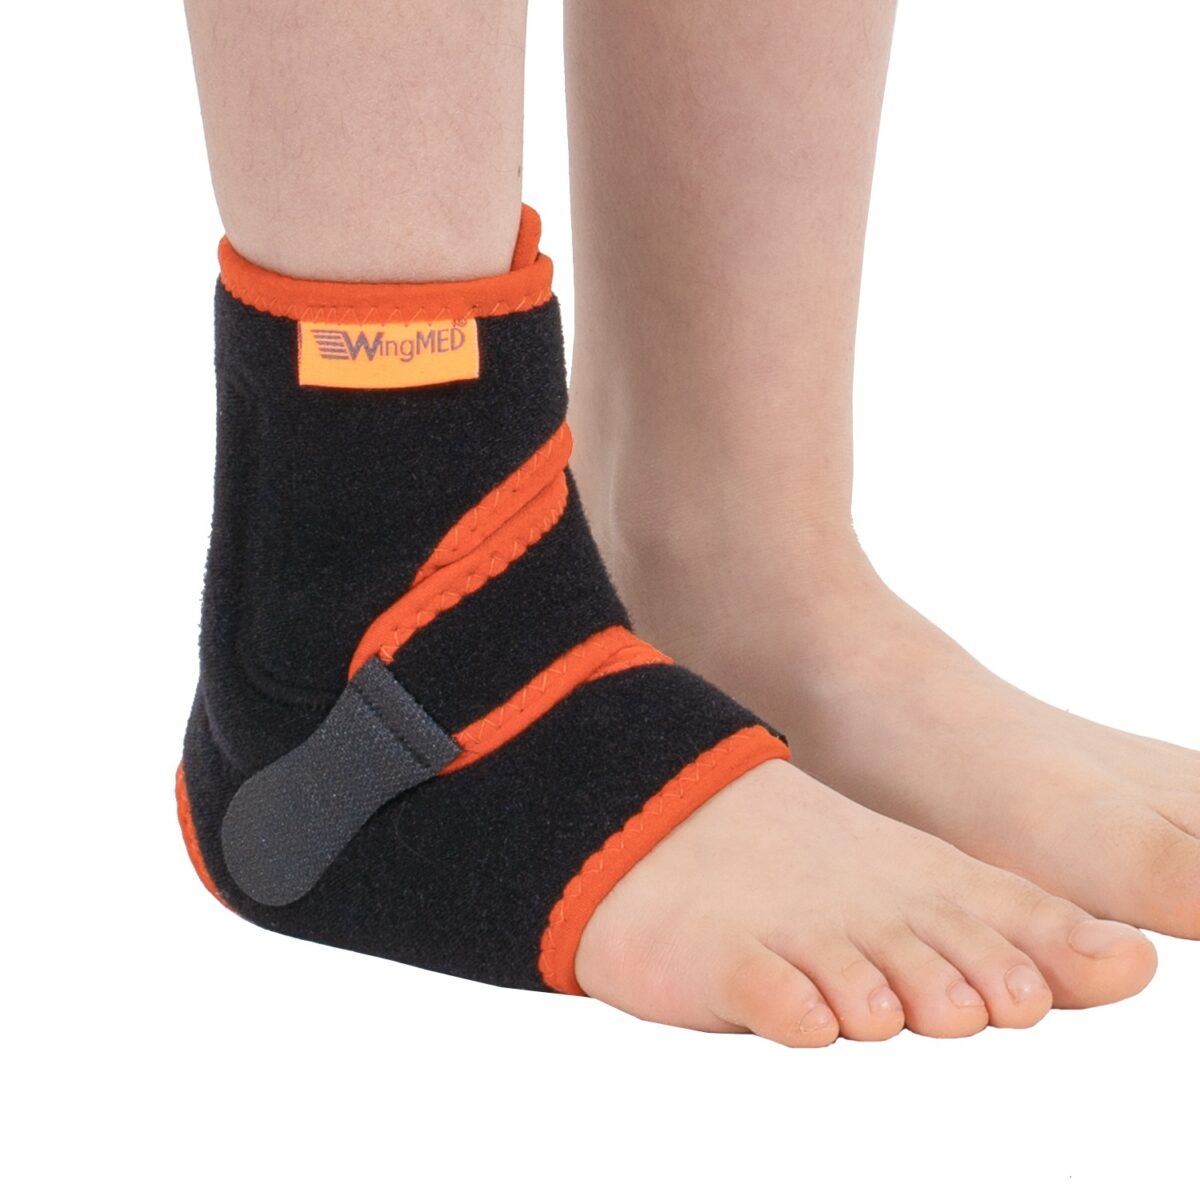 wingmed orthopedic equipments W922 ligament ankle support with 8 starp 27